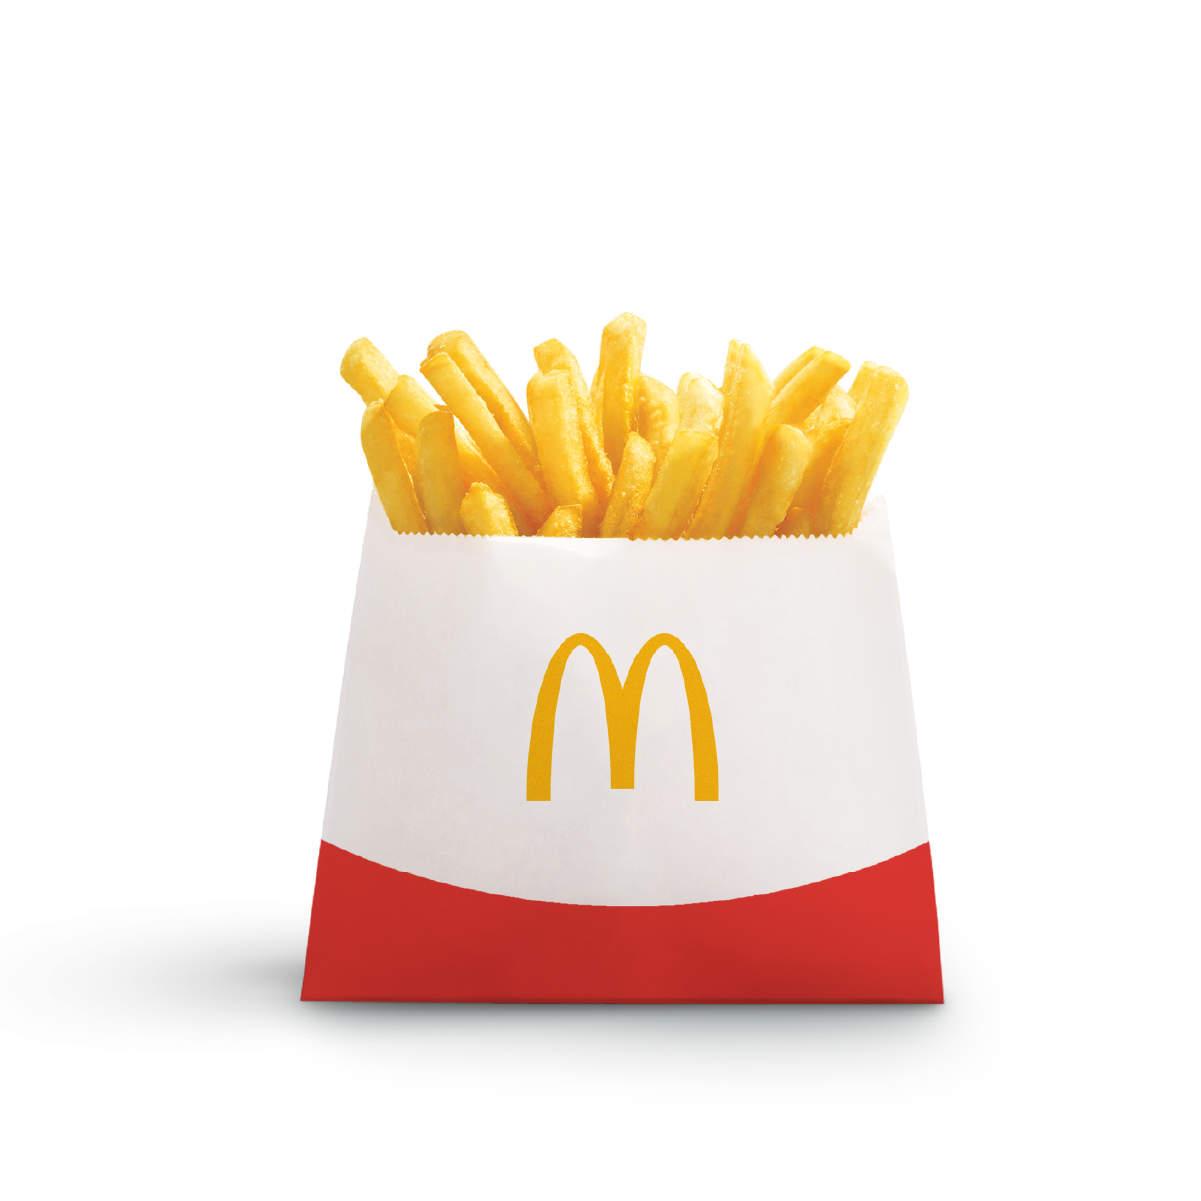 French Fries (Small) 